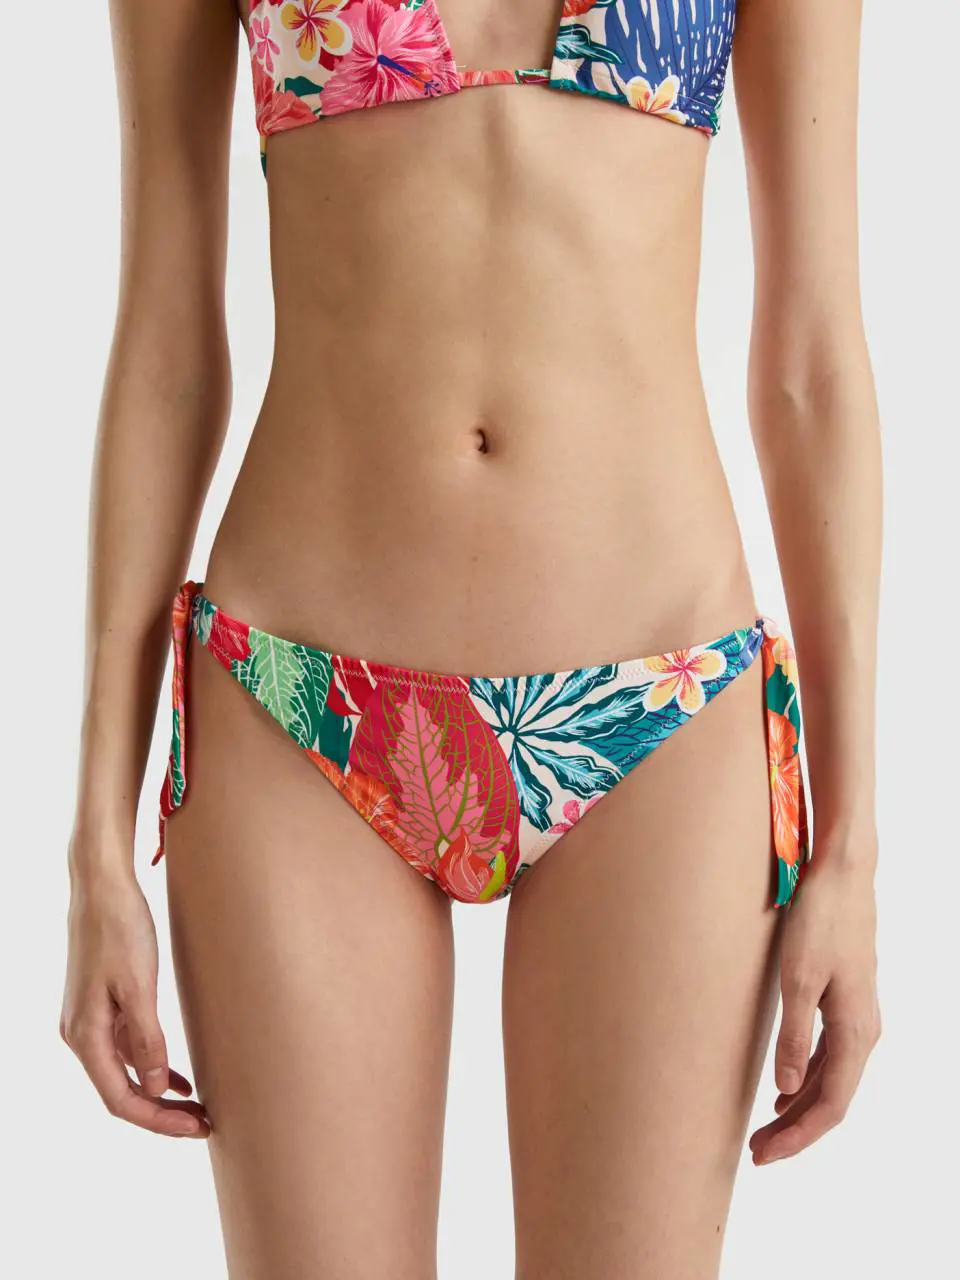 Benetton floral swim bottoms with bows. 1